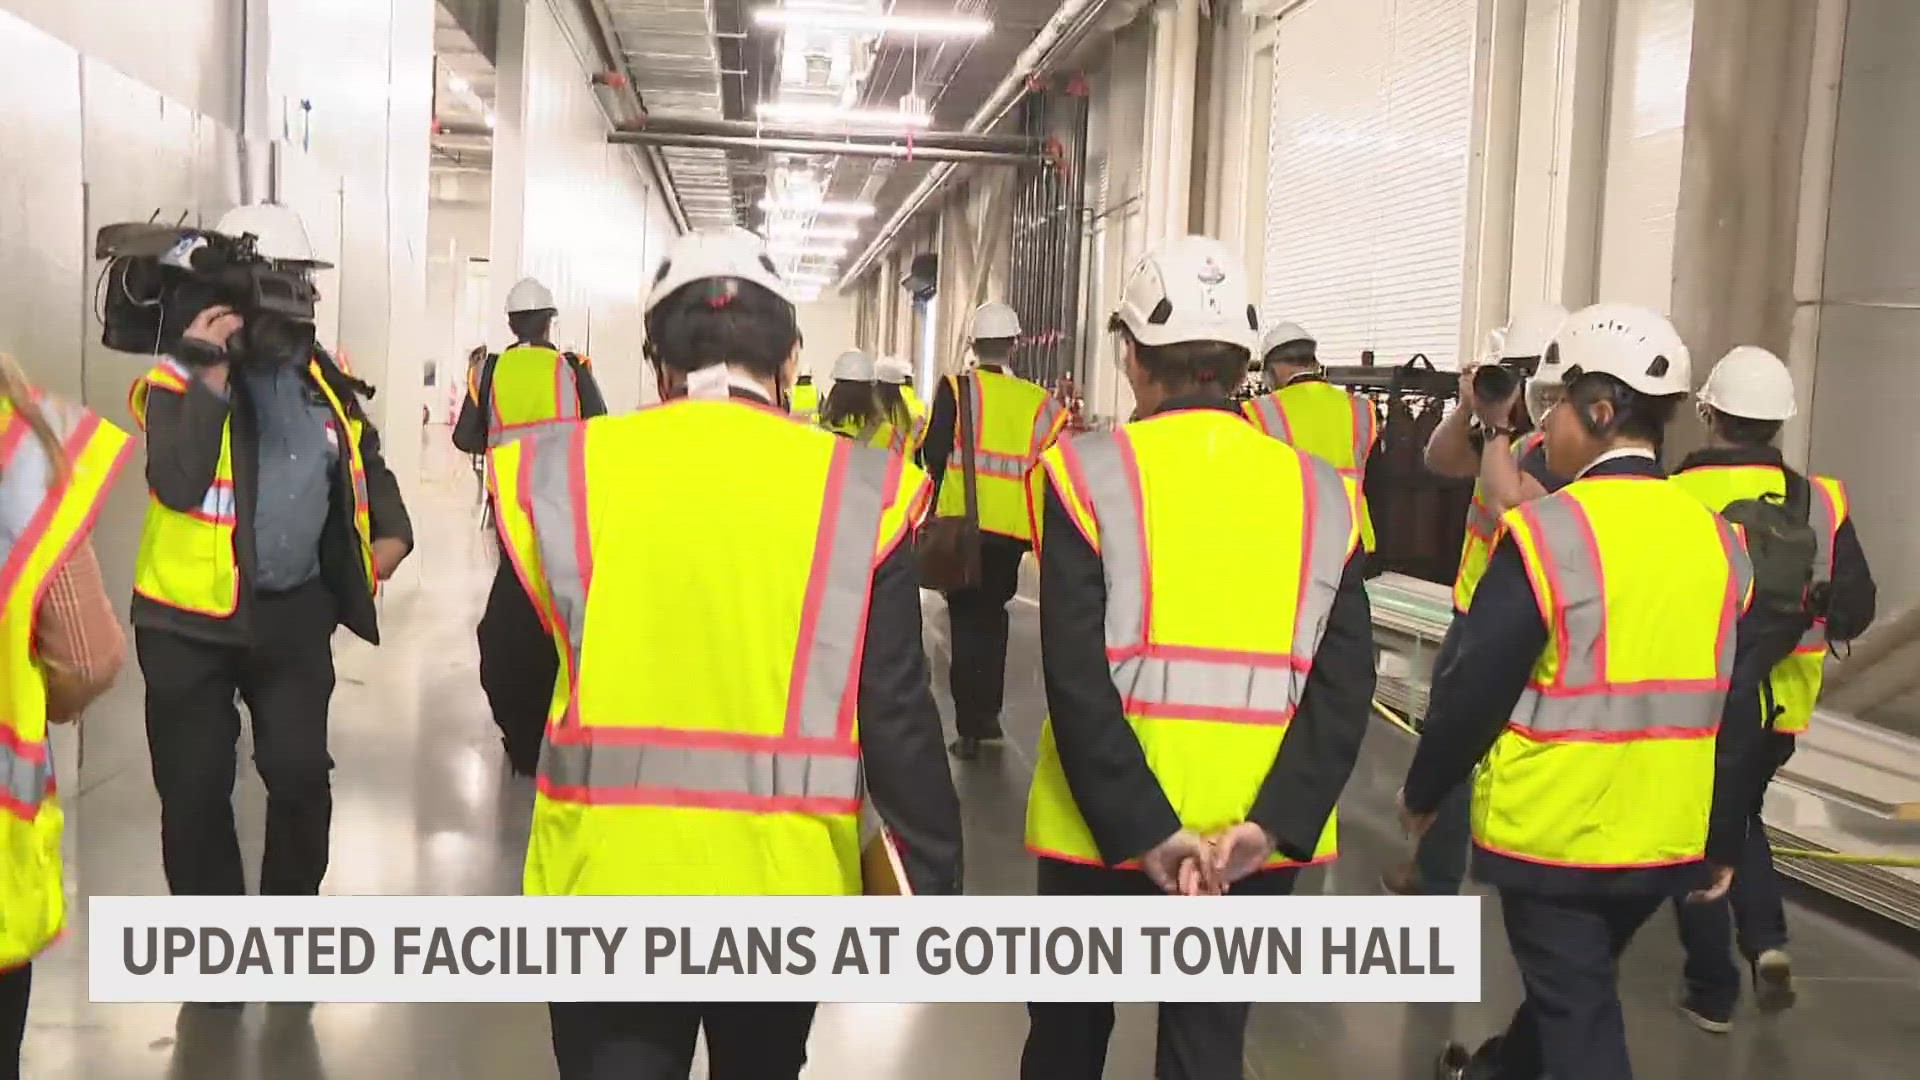 Town hall shows updated plans for Gotion facility.